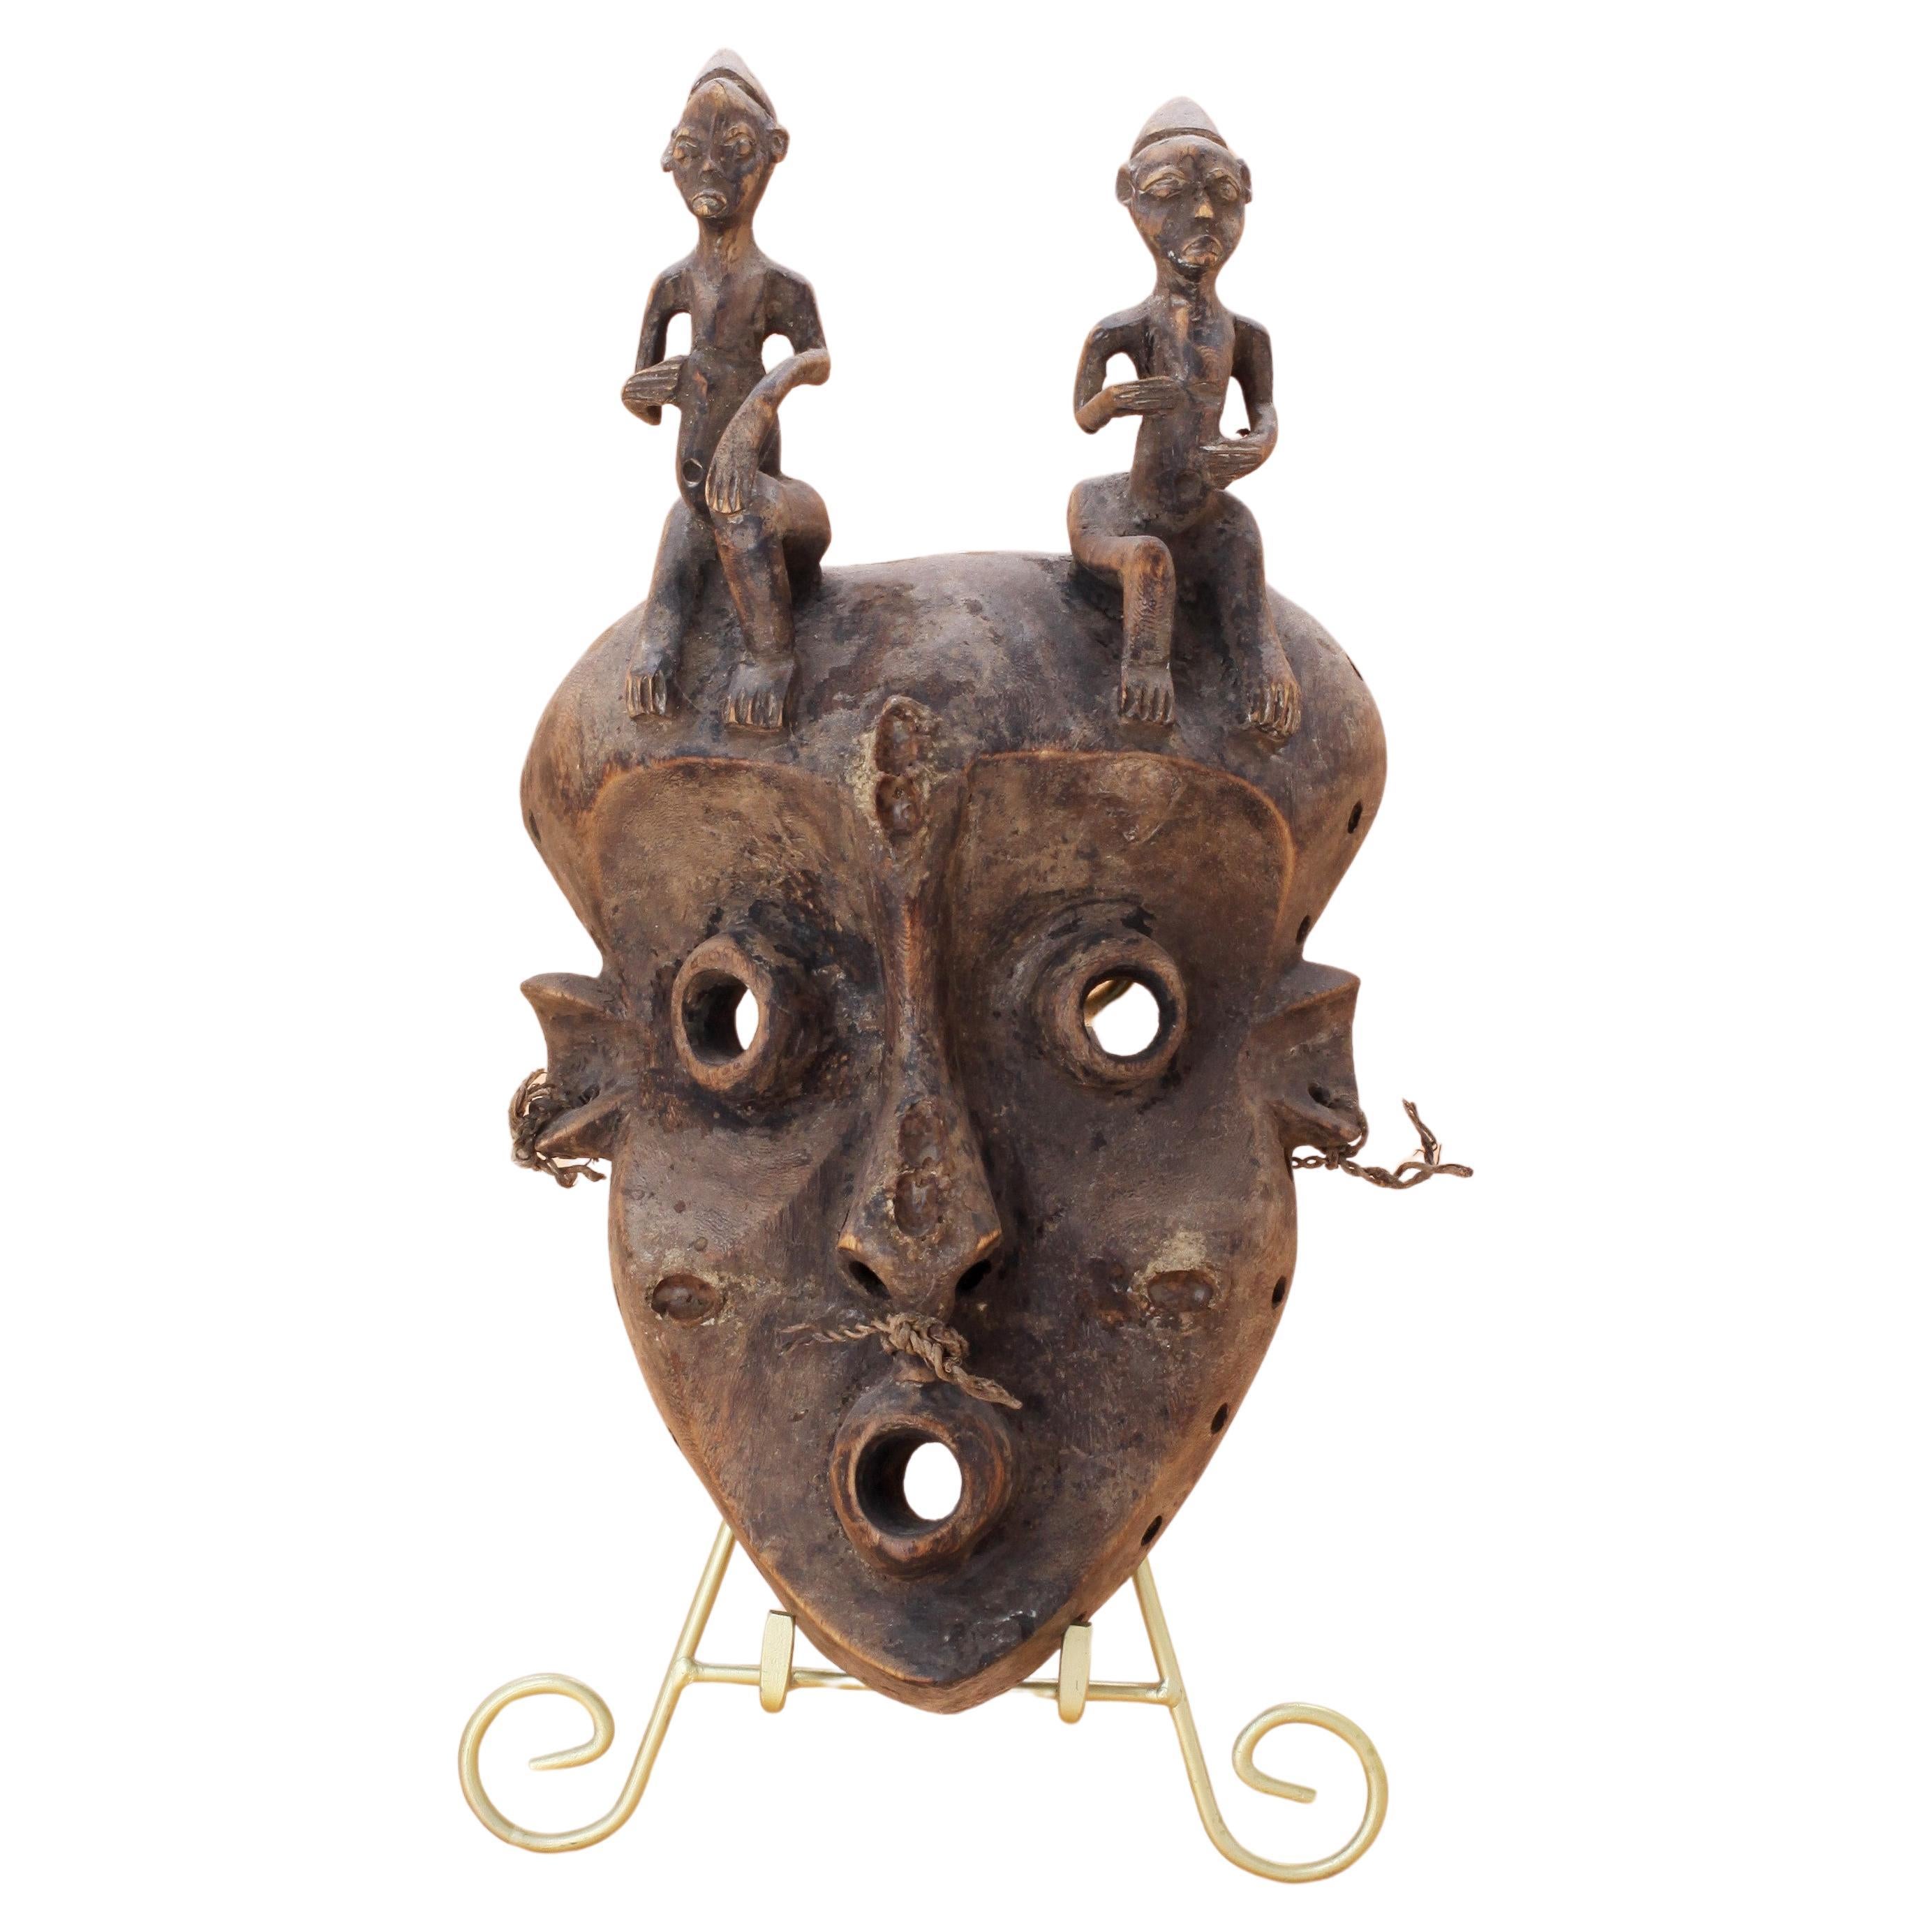 Early 20th Century Pende "Circumcision Ceremonial" Mask For Sale